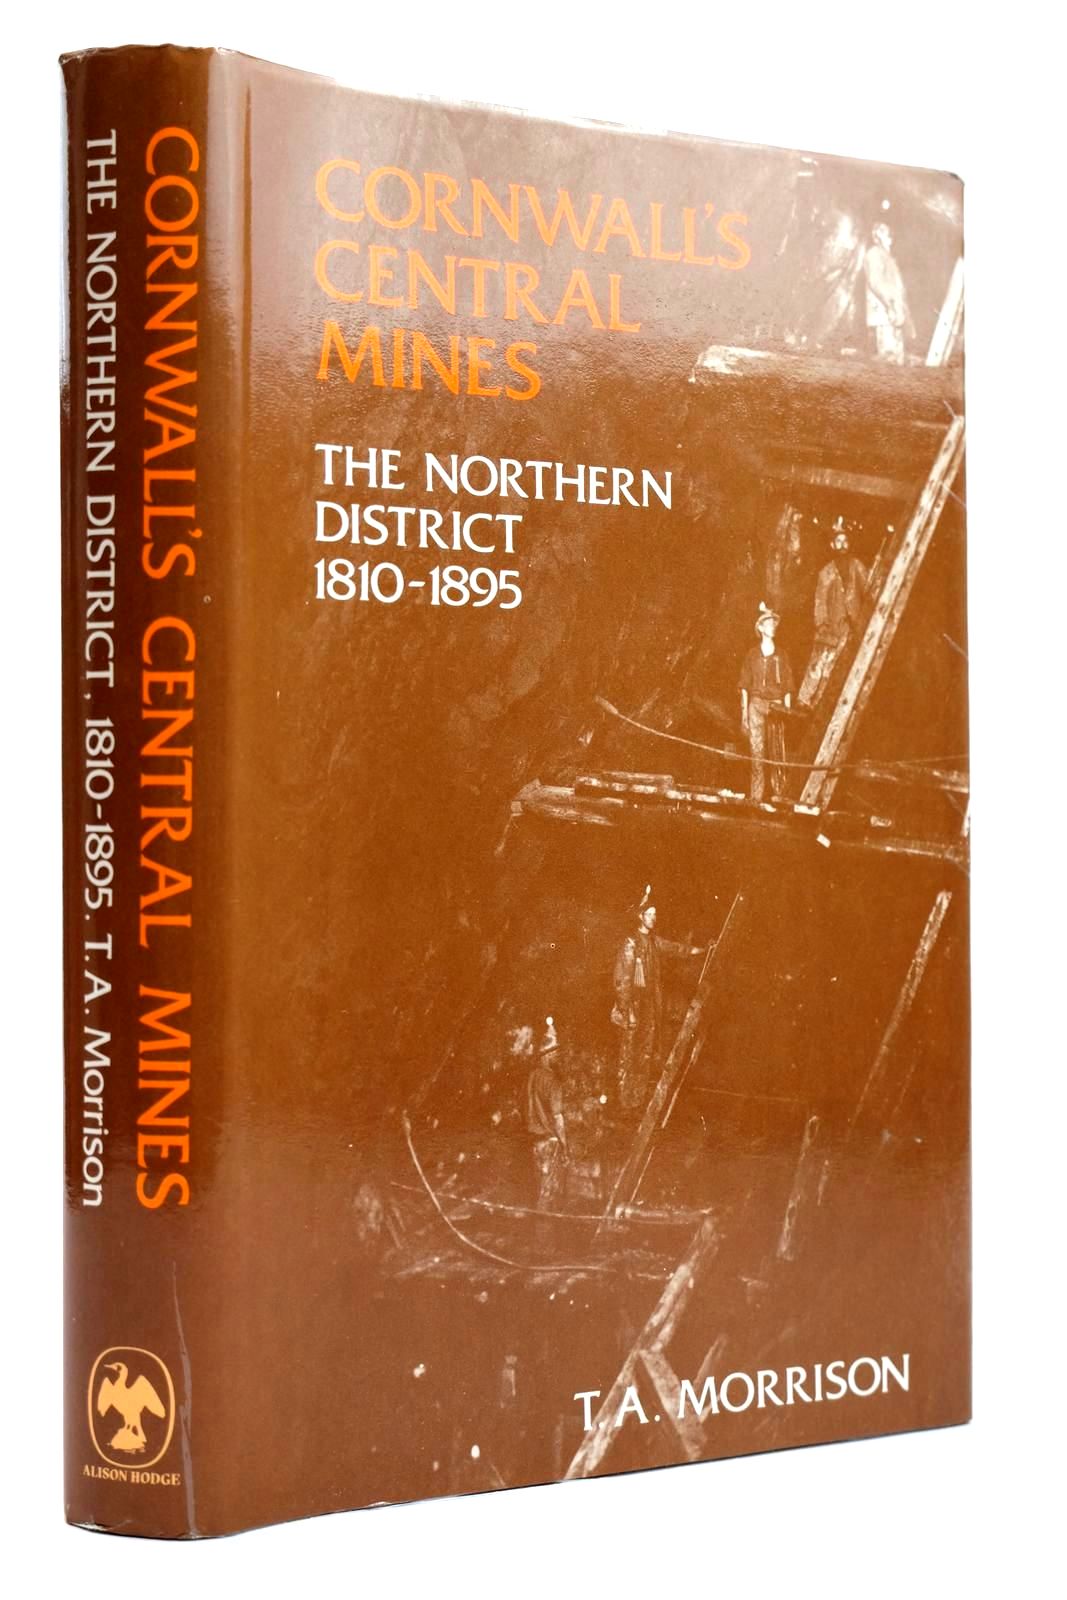 Photo of CORNWALL'S CENTRAL MINES THE NORTHERN DISTRICT written by Morrison, T.A. published by Alison Hodge (STOCK CODE: 2131982)  for sale by Stella & Rose's Books